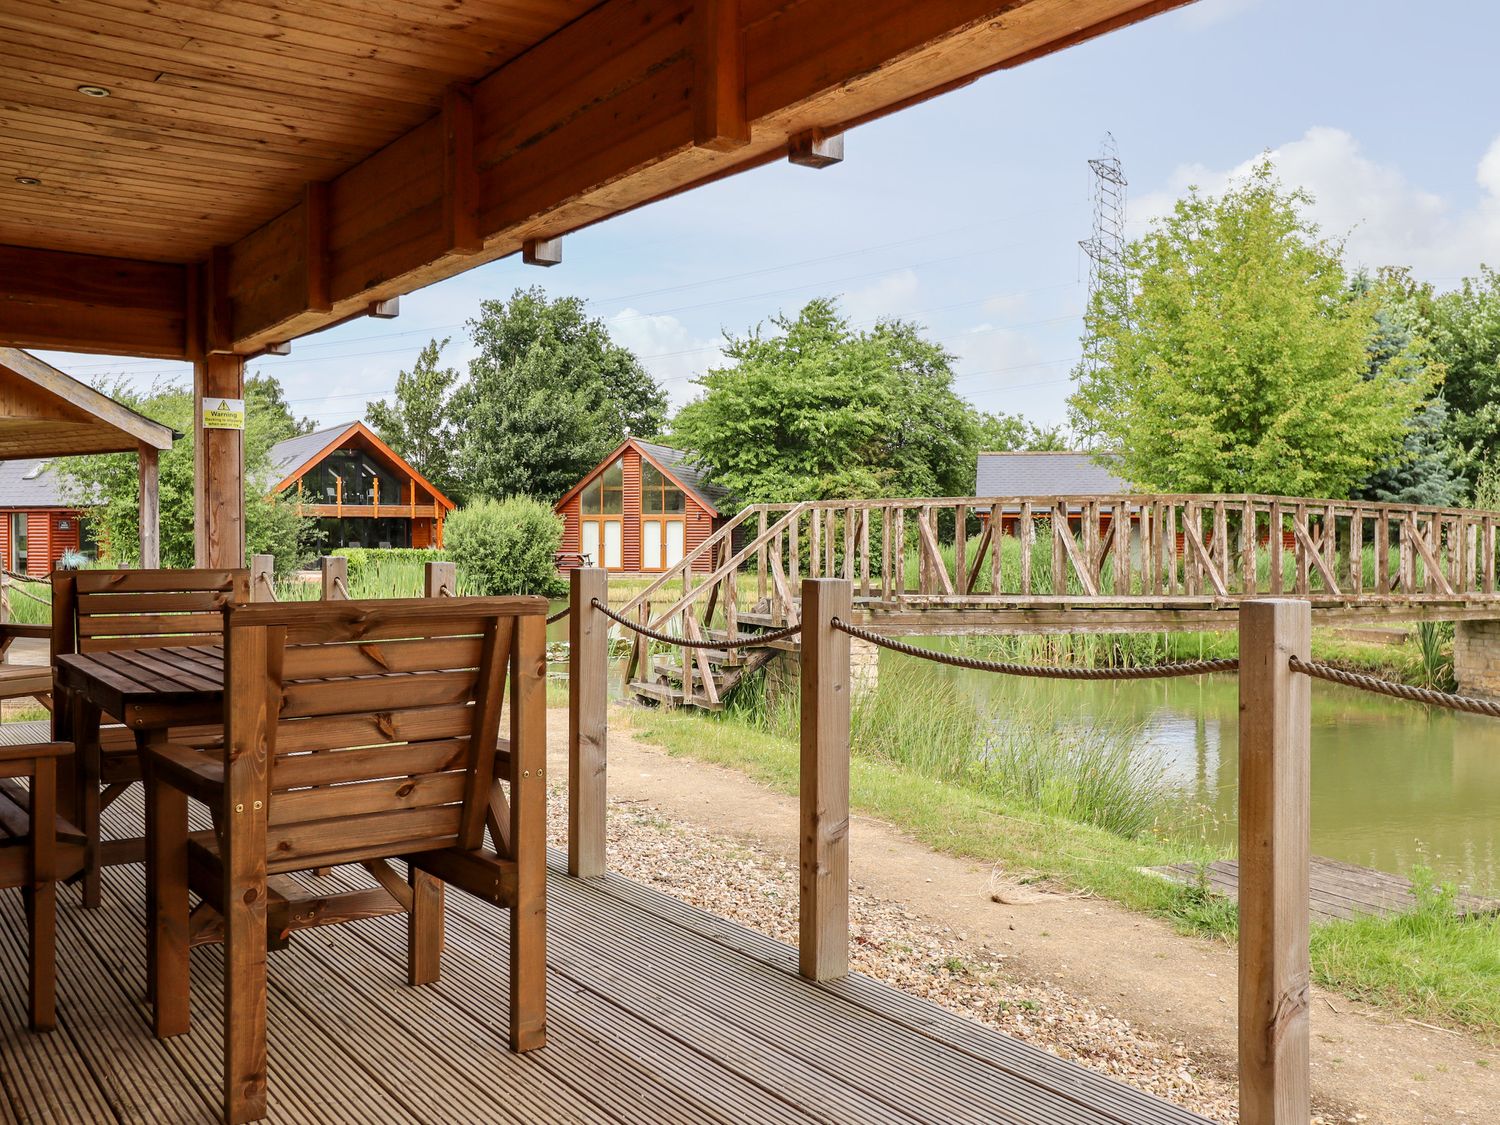 Lodge 24 is near South Hykeham, in Lincolnshire. Four-bedroom lodge with hot tub and private balcony